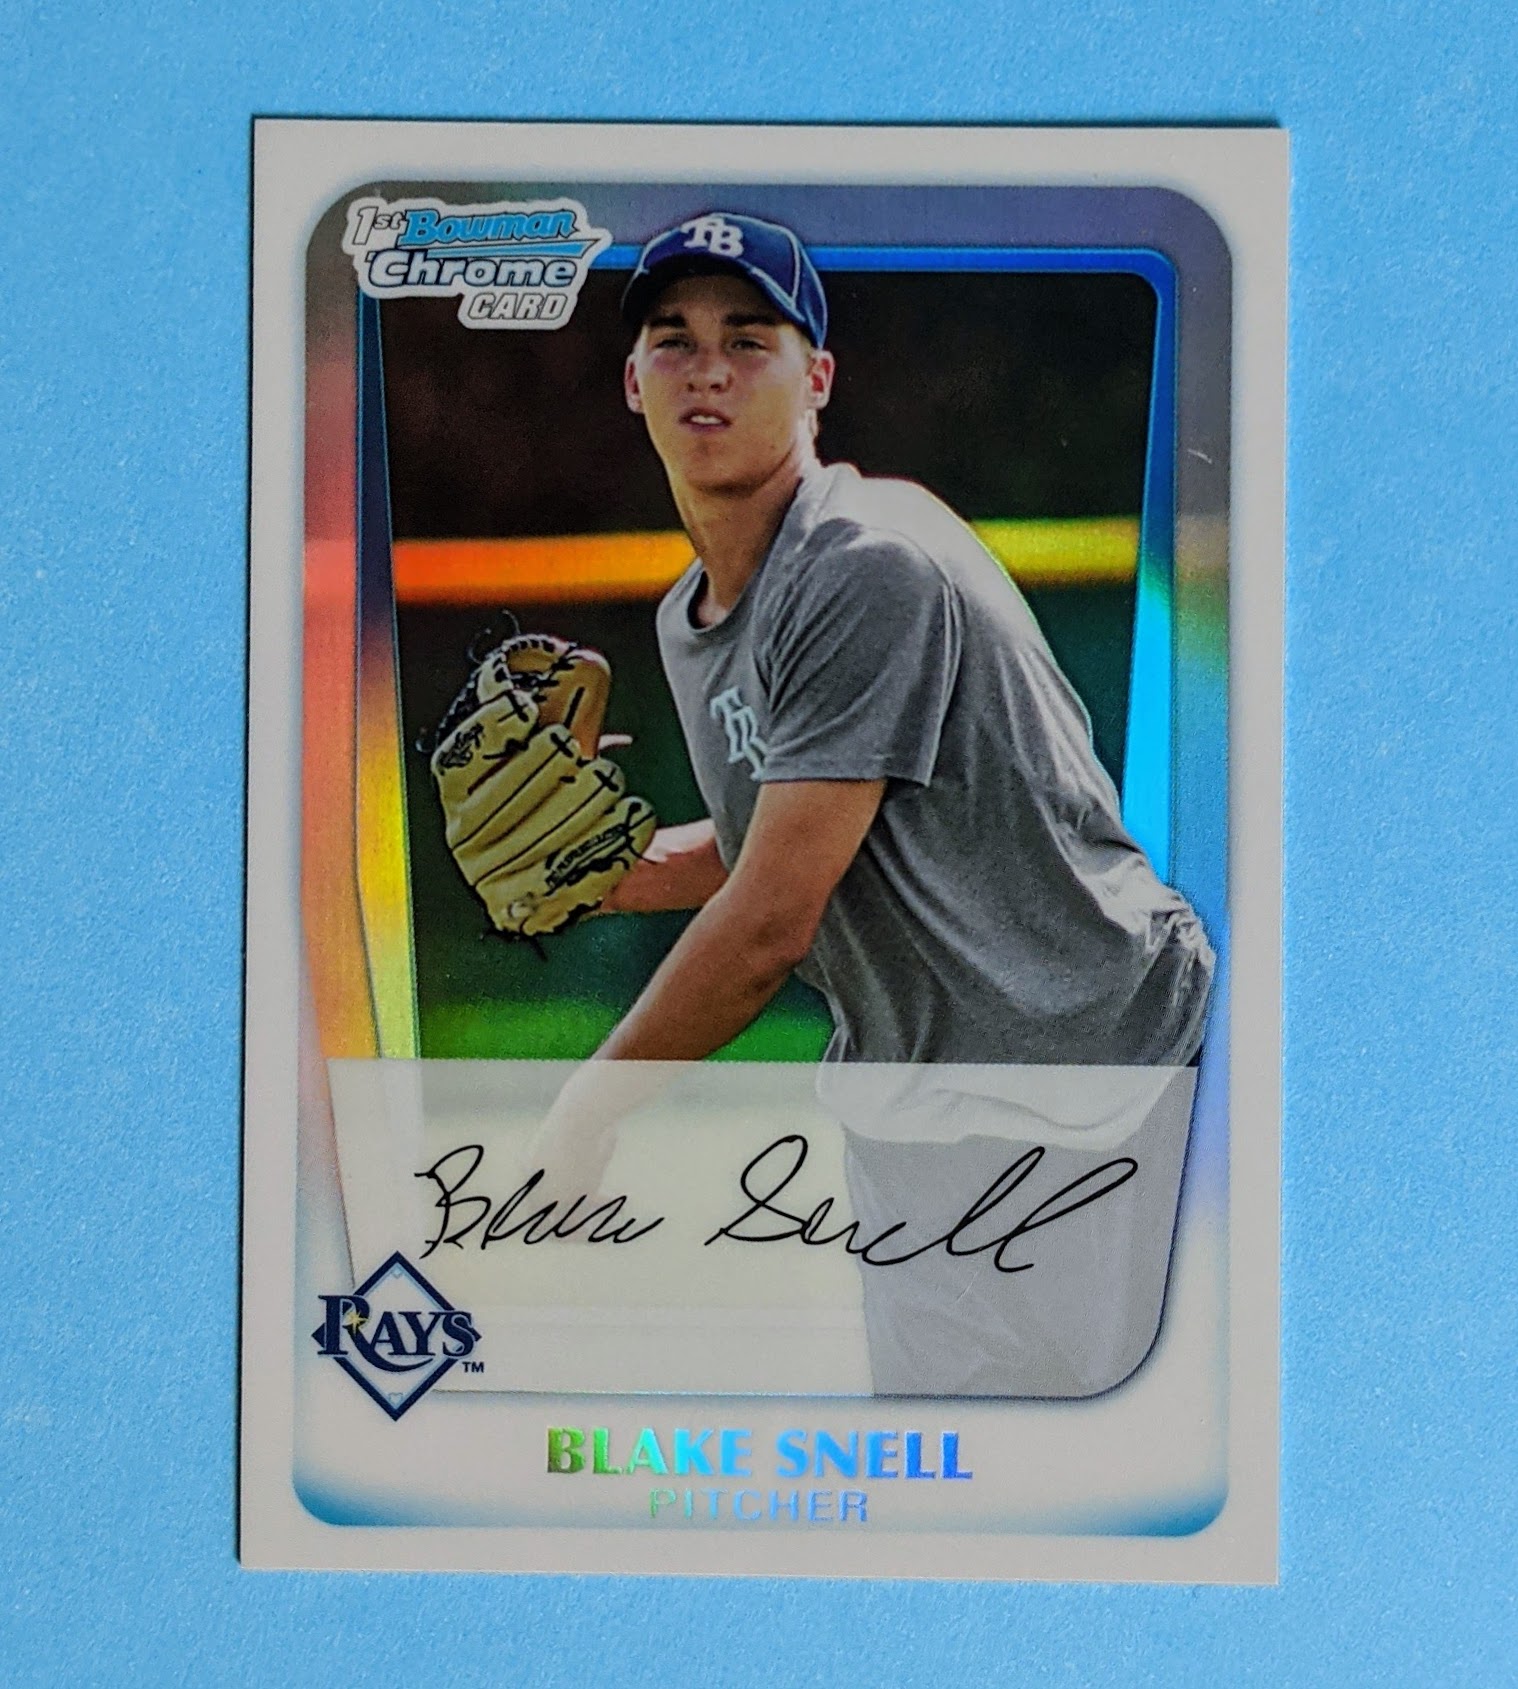 Blake Snell has single-digit number